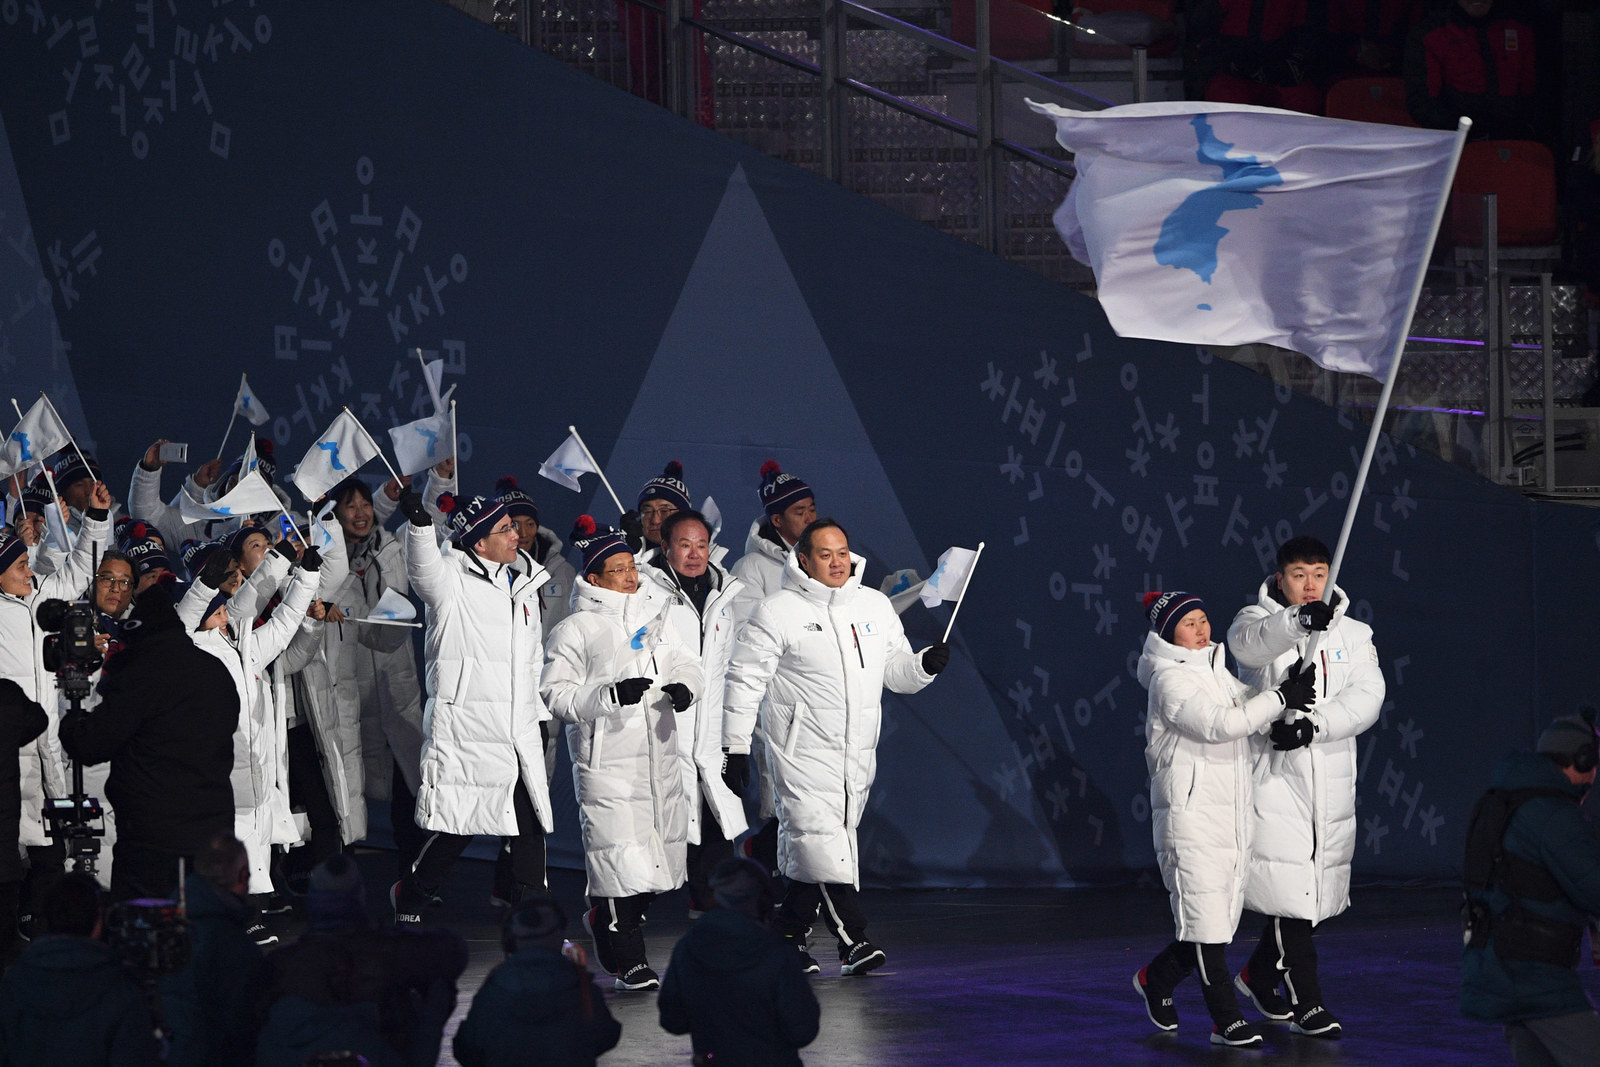 Unified Korean women's ice hockey team loses Olympic opener, but peace wins  (updated) - Xinhua